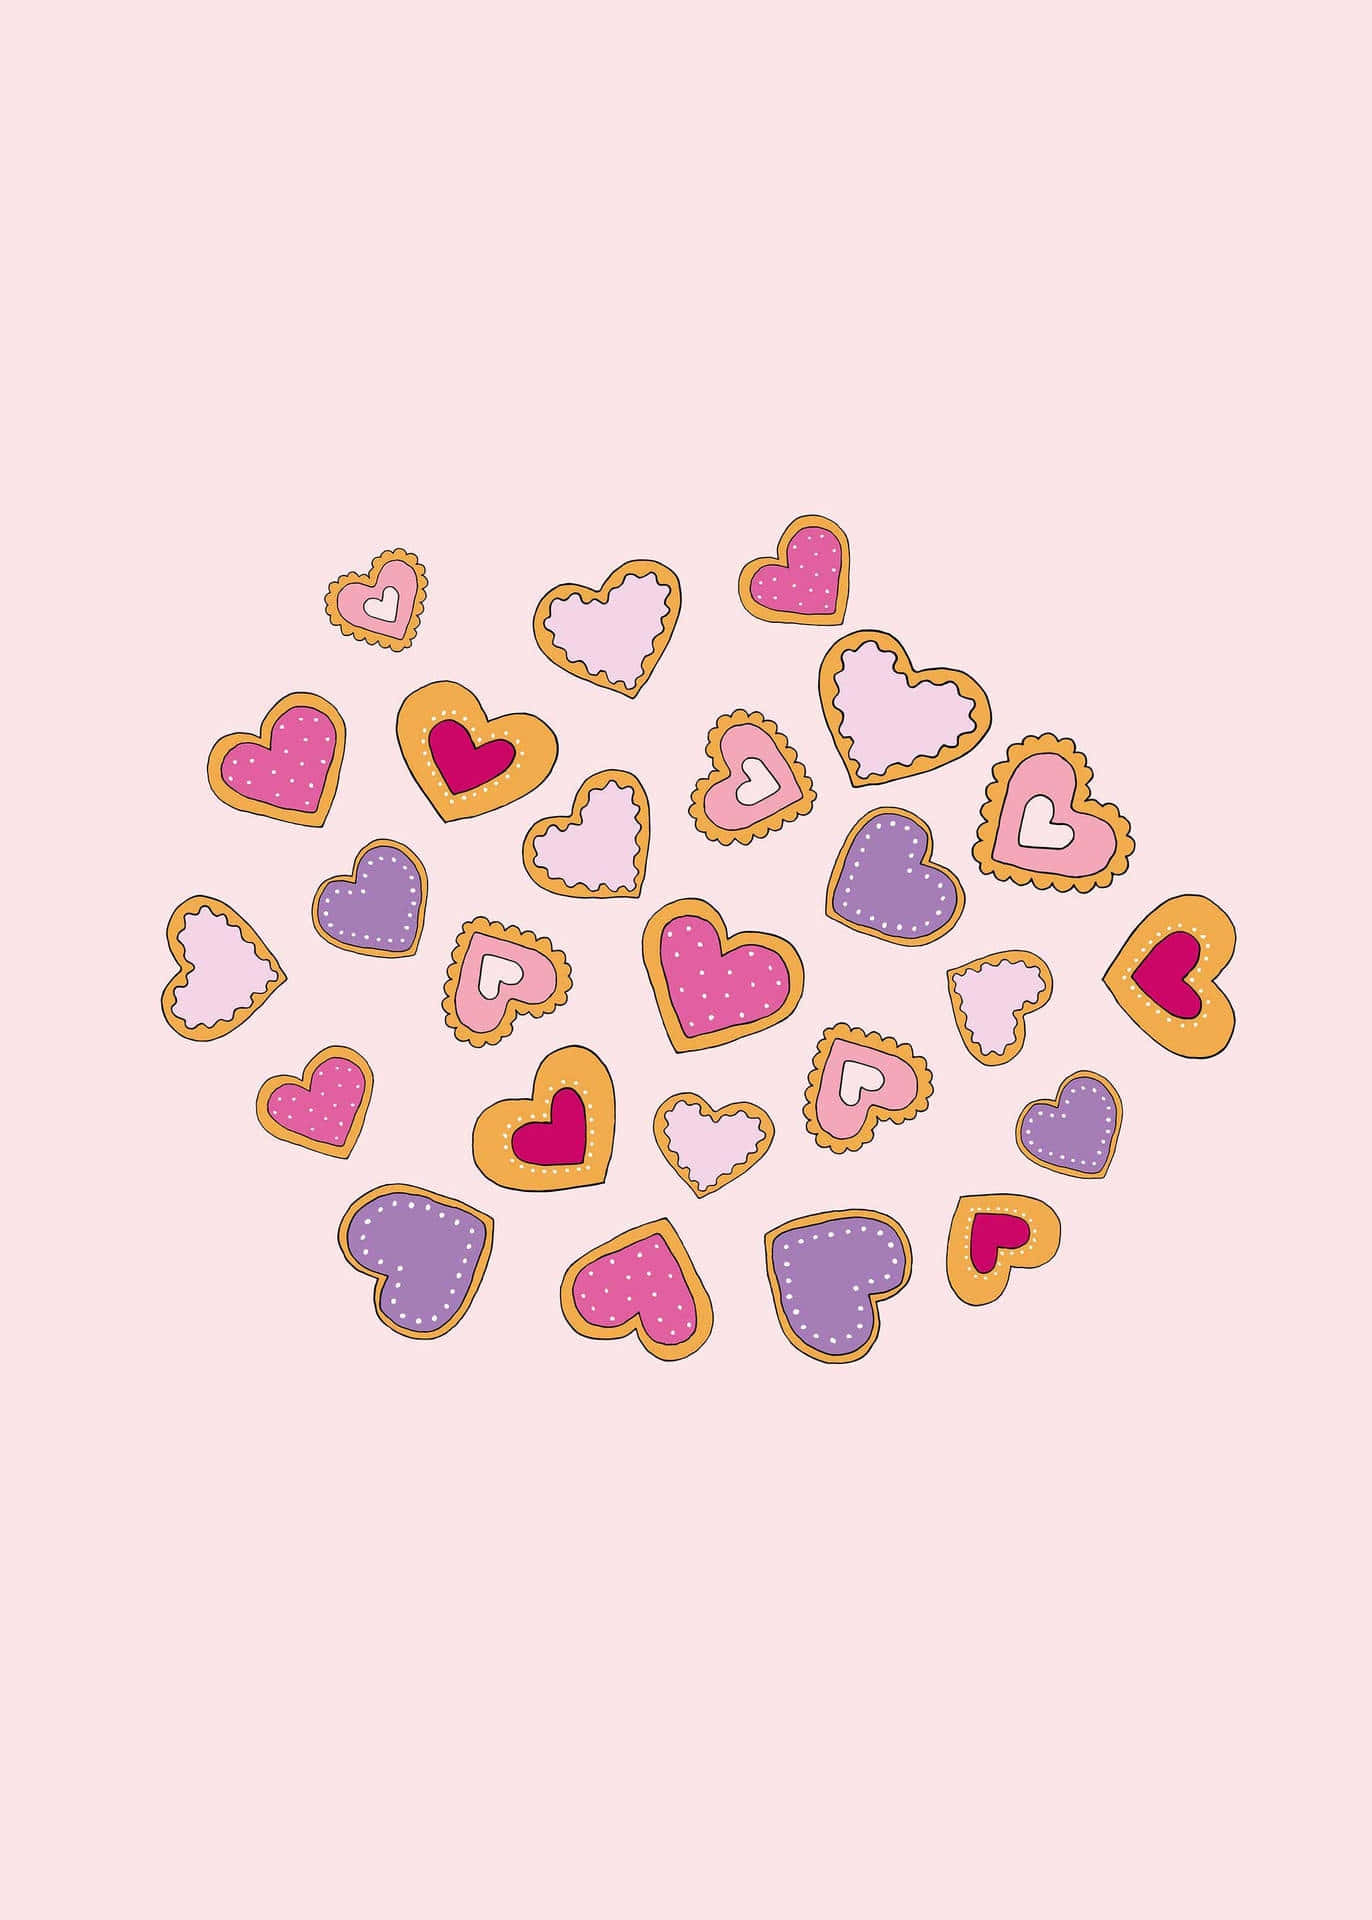 Assorted Pink Hearts Aesthetic Wallpaper